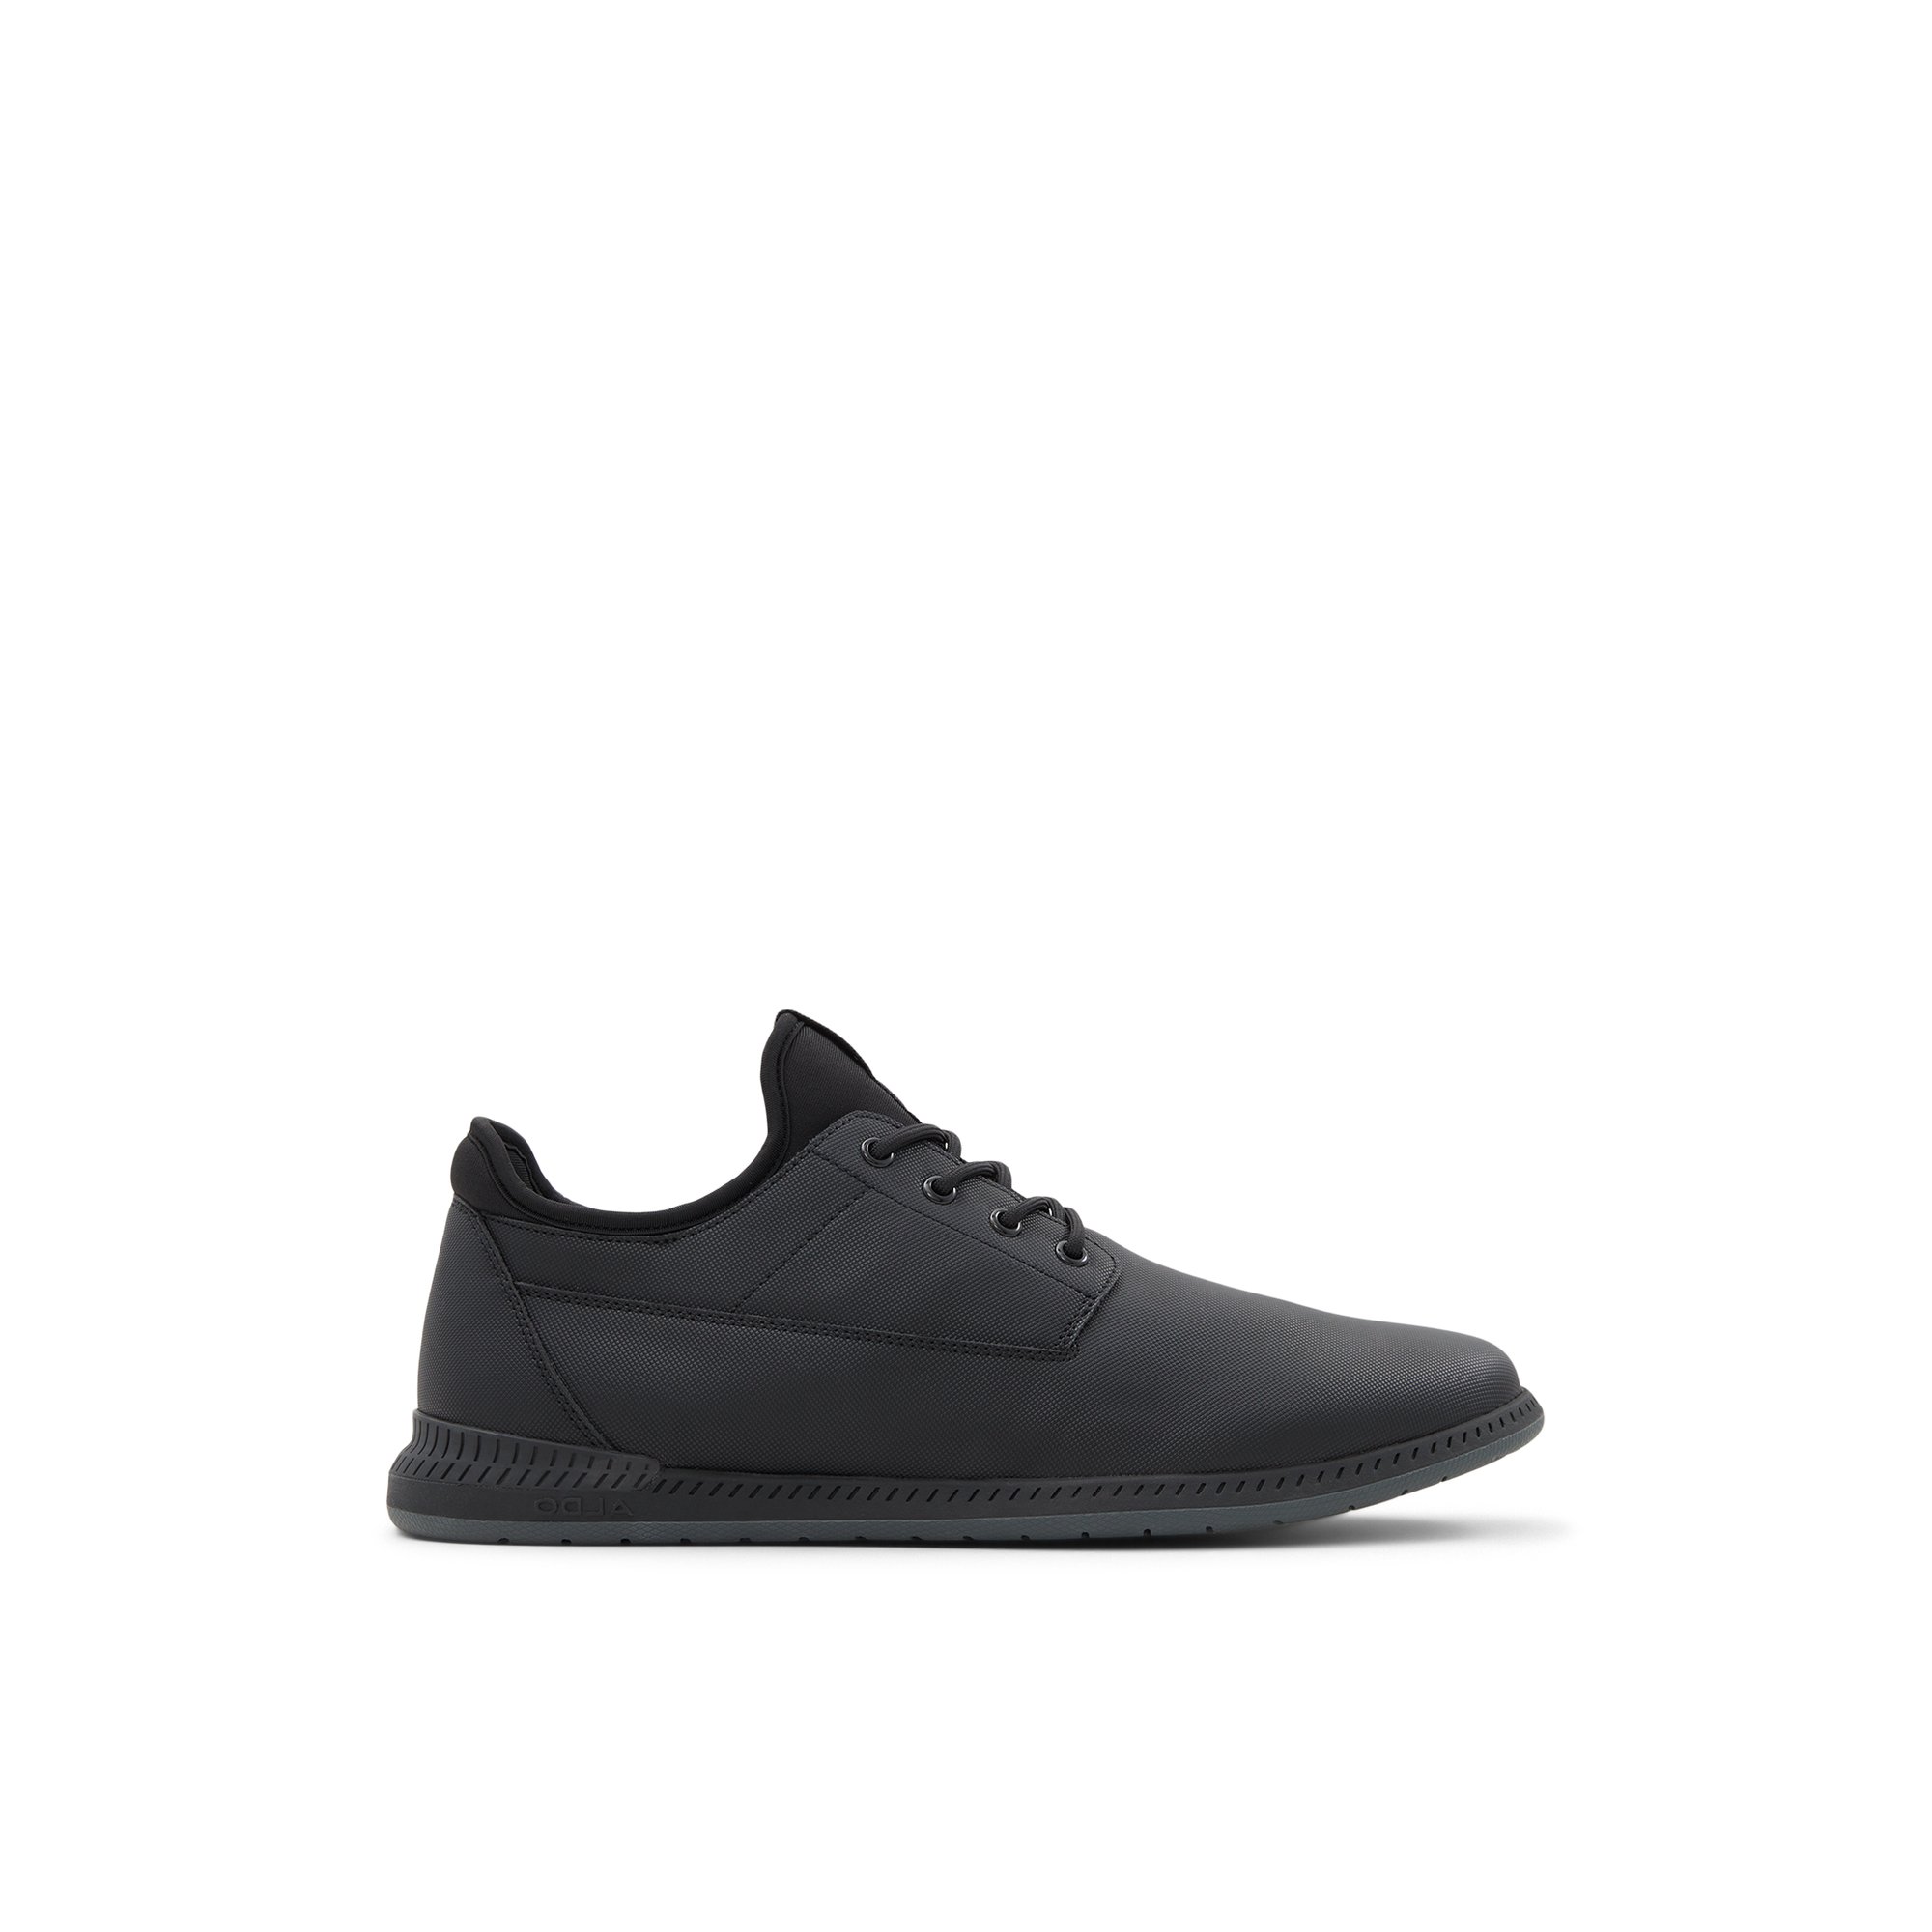 ALDO Blufferss-wr - Men's Oxfords and Lace up - Black